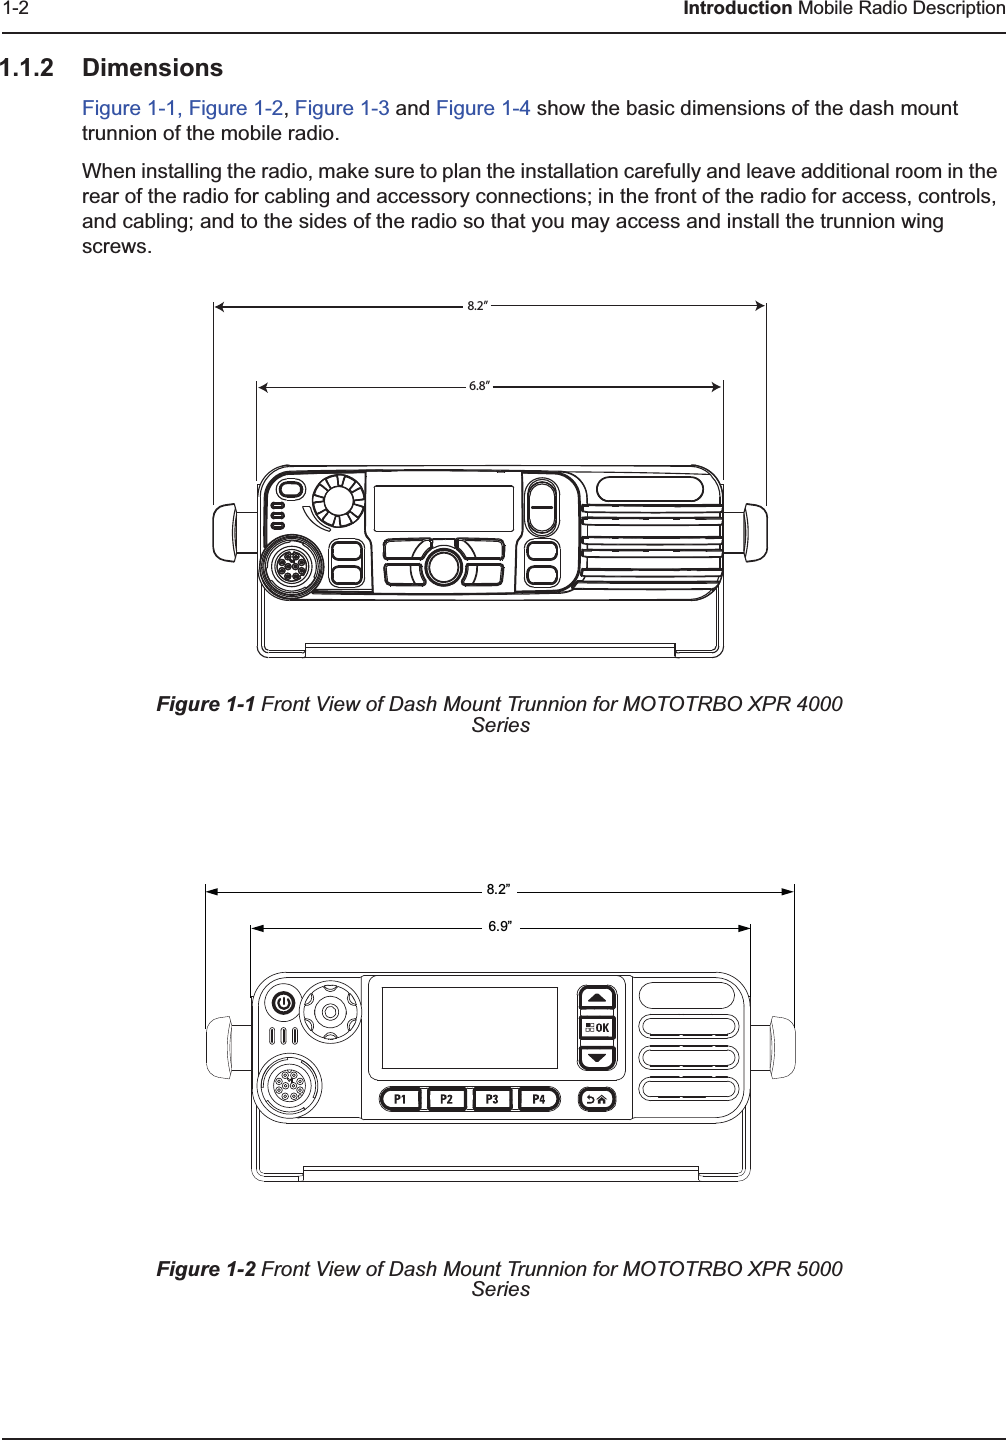 1-2 Introduction Mobile Radio Description1.1.2 DimensionsFigure 1-1, Figure 1-2, Figure 1-3 and Figure 1-4 show the basic dimensions of the dash mount trunnion of the mobile radio.When installing the radio, make sure to plan the installation carefully and leave additional room in the rear of the radio for cabling and accessory connections; in the front of the radio for access, controls, and cabling; and to the sides of the radio so that you may access and install the trunnion wing screws.Figure 1-1 Front View of Dash Mount Trunnion for MOTOTRBO XPR 4000 SeriesFigure 1-2 Front View of Dash Mount Trunnion for MOTOTRBO XPR 5000 Series8.2”6.8”6.9”8.2”